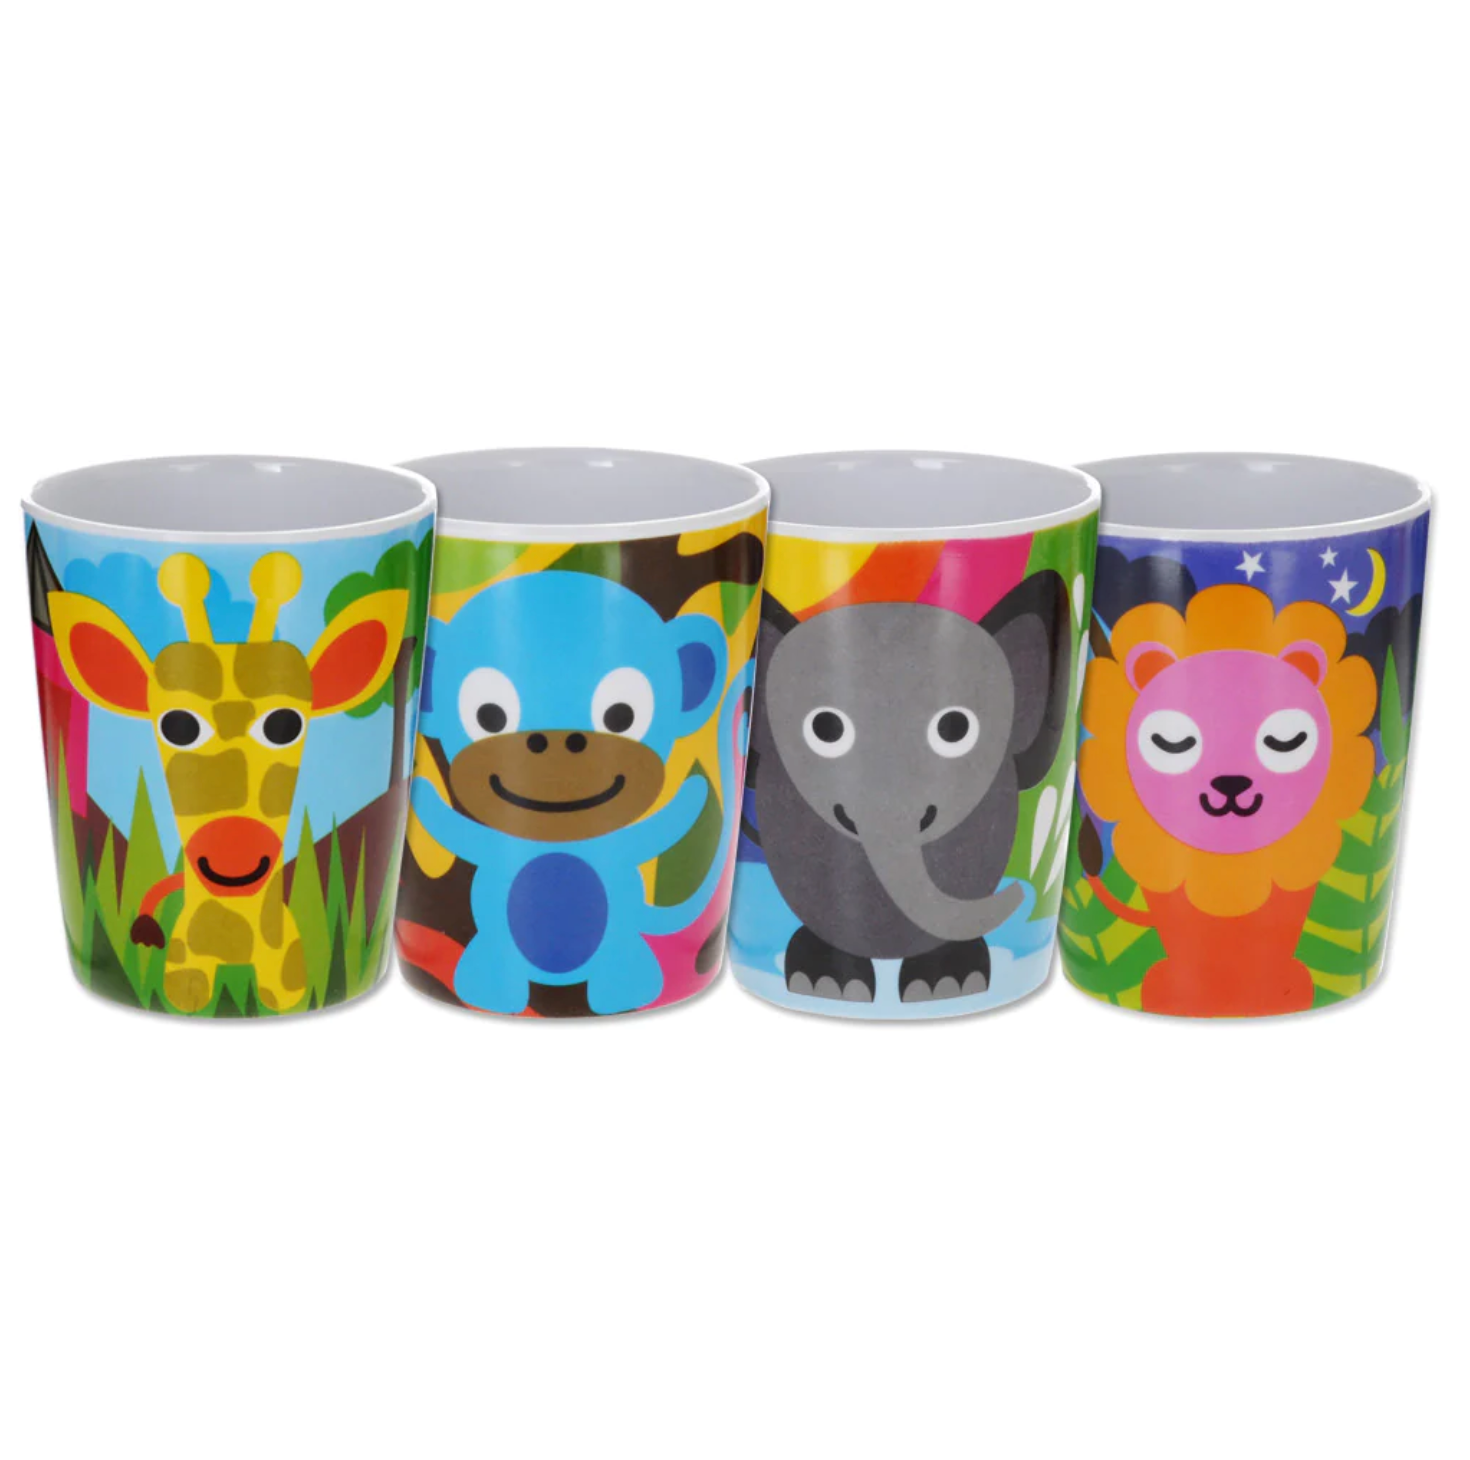 French Bull Kids Everyday Melamine 4 Piece Cup Set – Jungle Animals